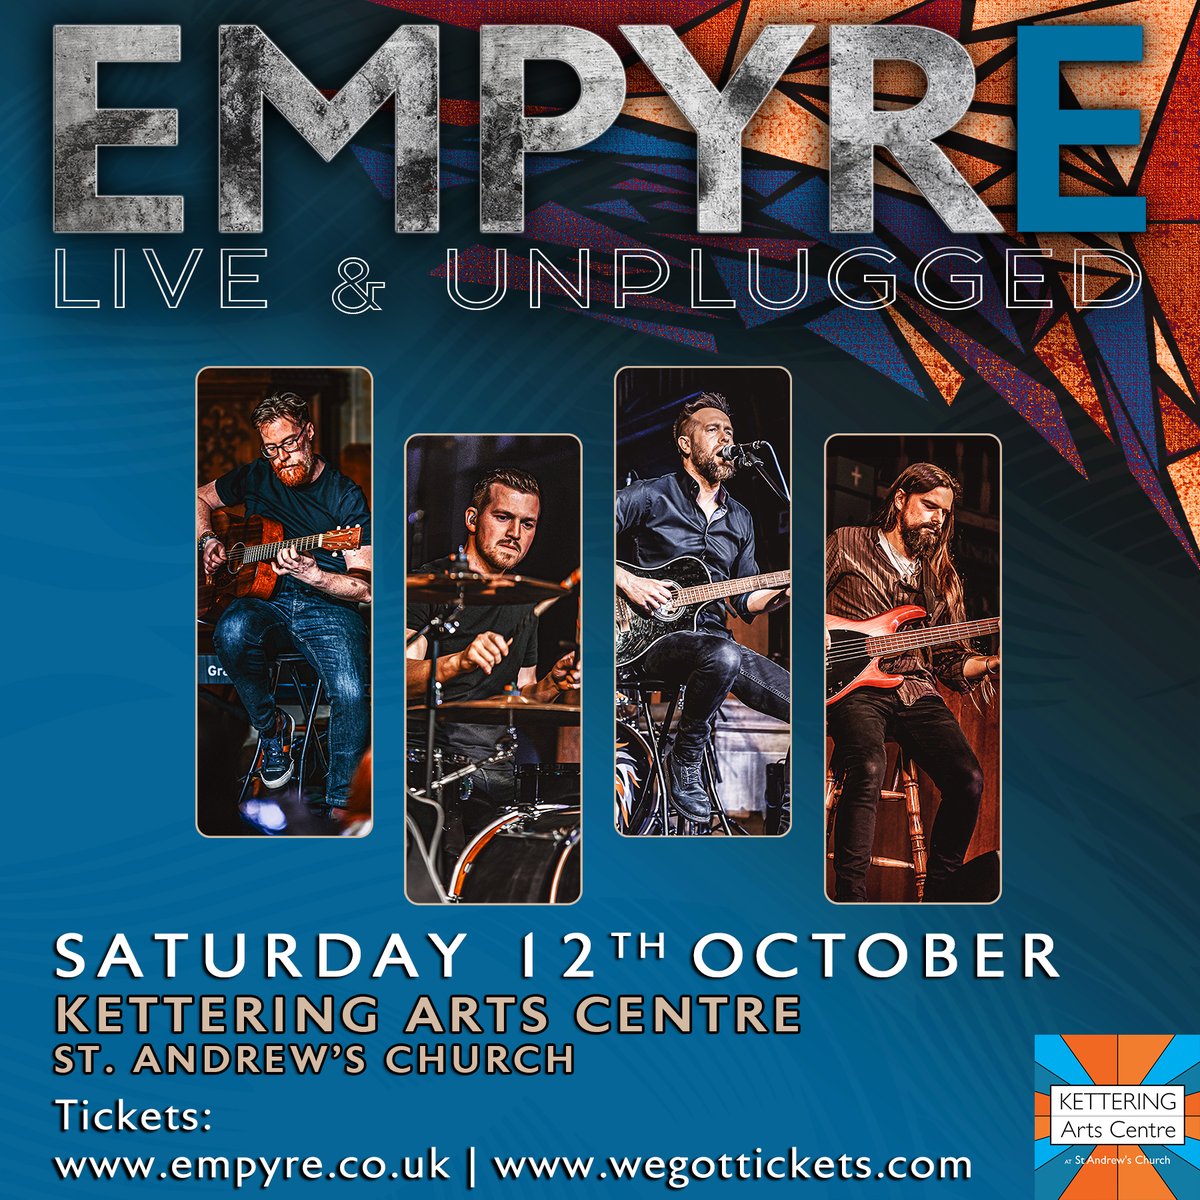 General sale tickets for our acoustic show at @Ketteringarts on Saturday 12th October are now available here: empyre.co.uk/gigs #nn #northampton #northants #kettering #gig #gigs #whatson #show #livemusic #rock #acoustic #music